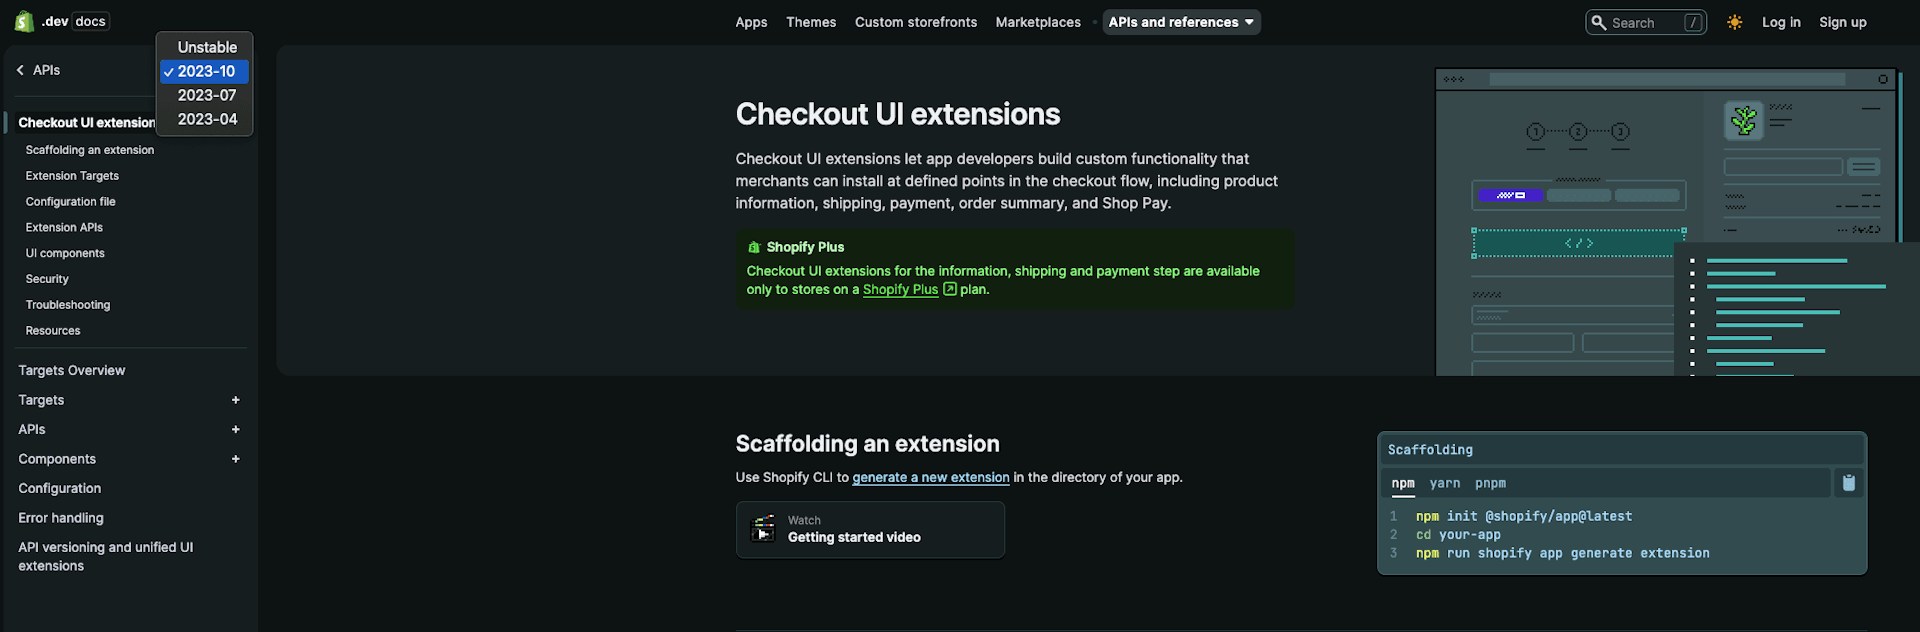 Shopify Checkout UI extensions